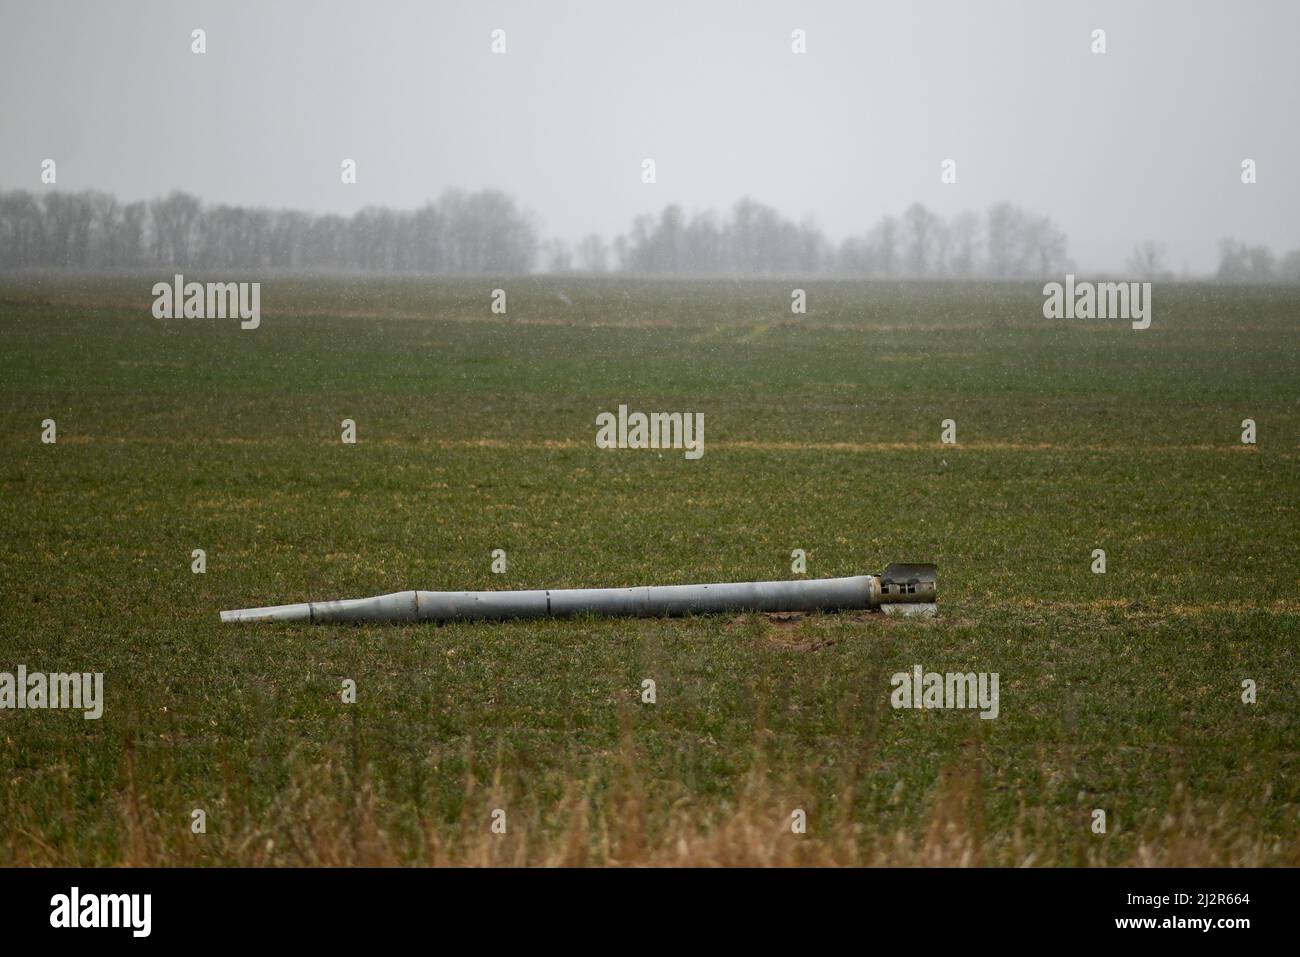 Ukraine. 03rd Apr, 2022. The husk of Russian cluster munition rockets lay buried in the fields near the villages of Smolyanka and Olyshivka after shelling in the previous nights, in the Chernihiv Oblast on April 3rd, 2022. Olyshivka, Ukraine. Russian military forces entered Ukraine territory on Feb. 24, 2022. (Photo by Justin Yau/Sipa USA) Credit: Sipa USA/Alamy Live News Stock Photo